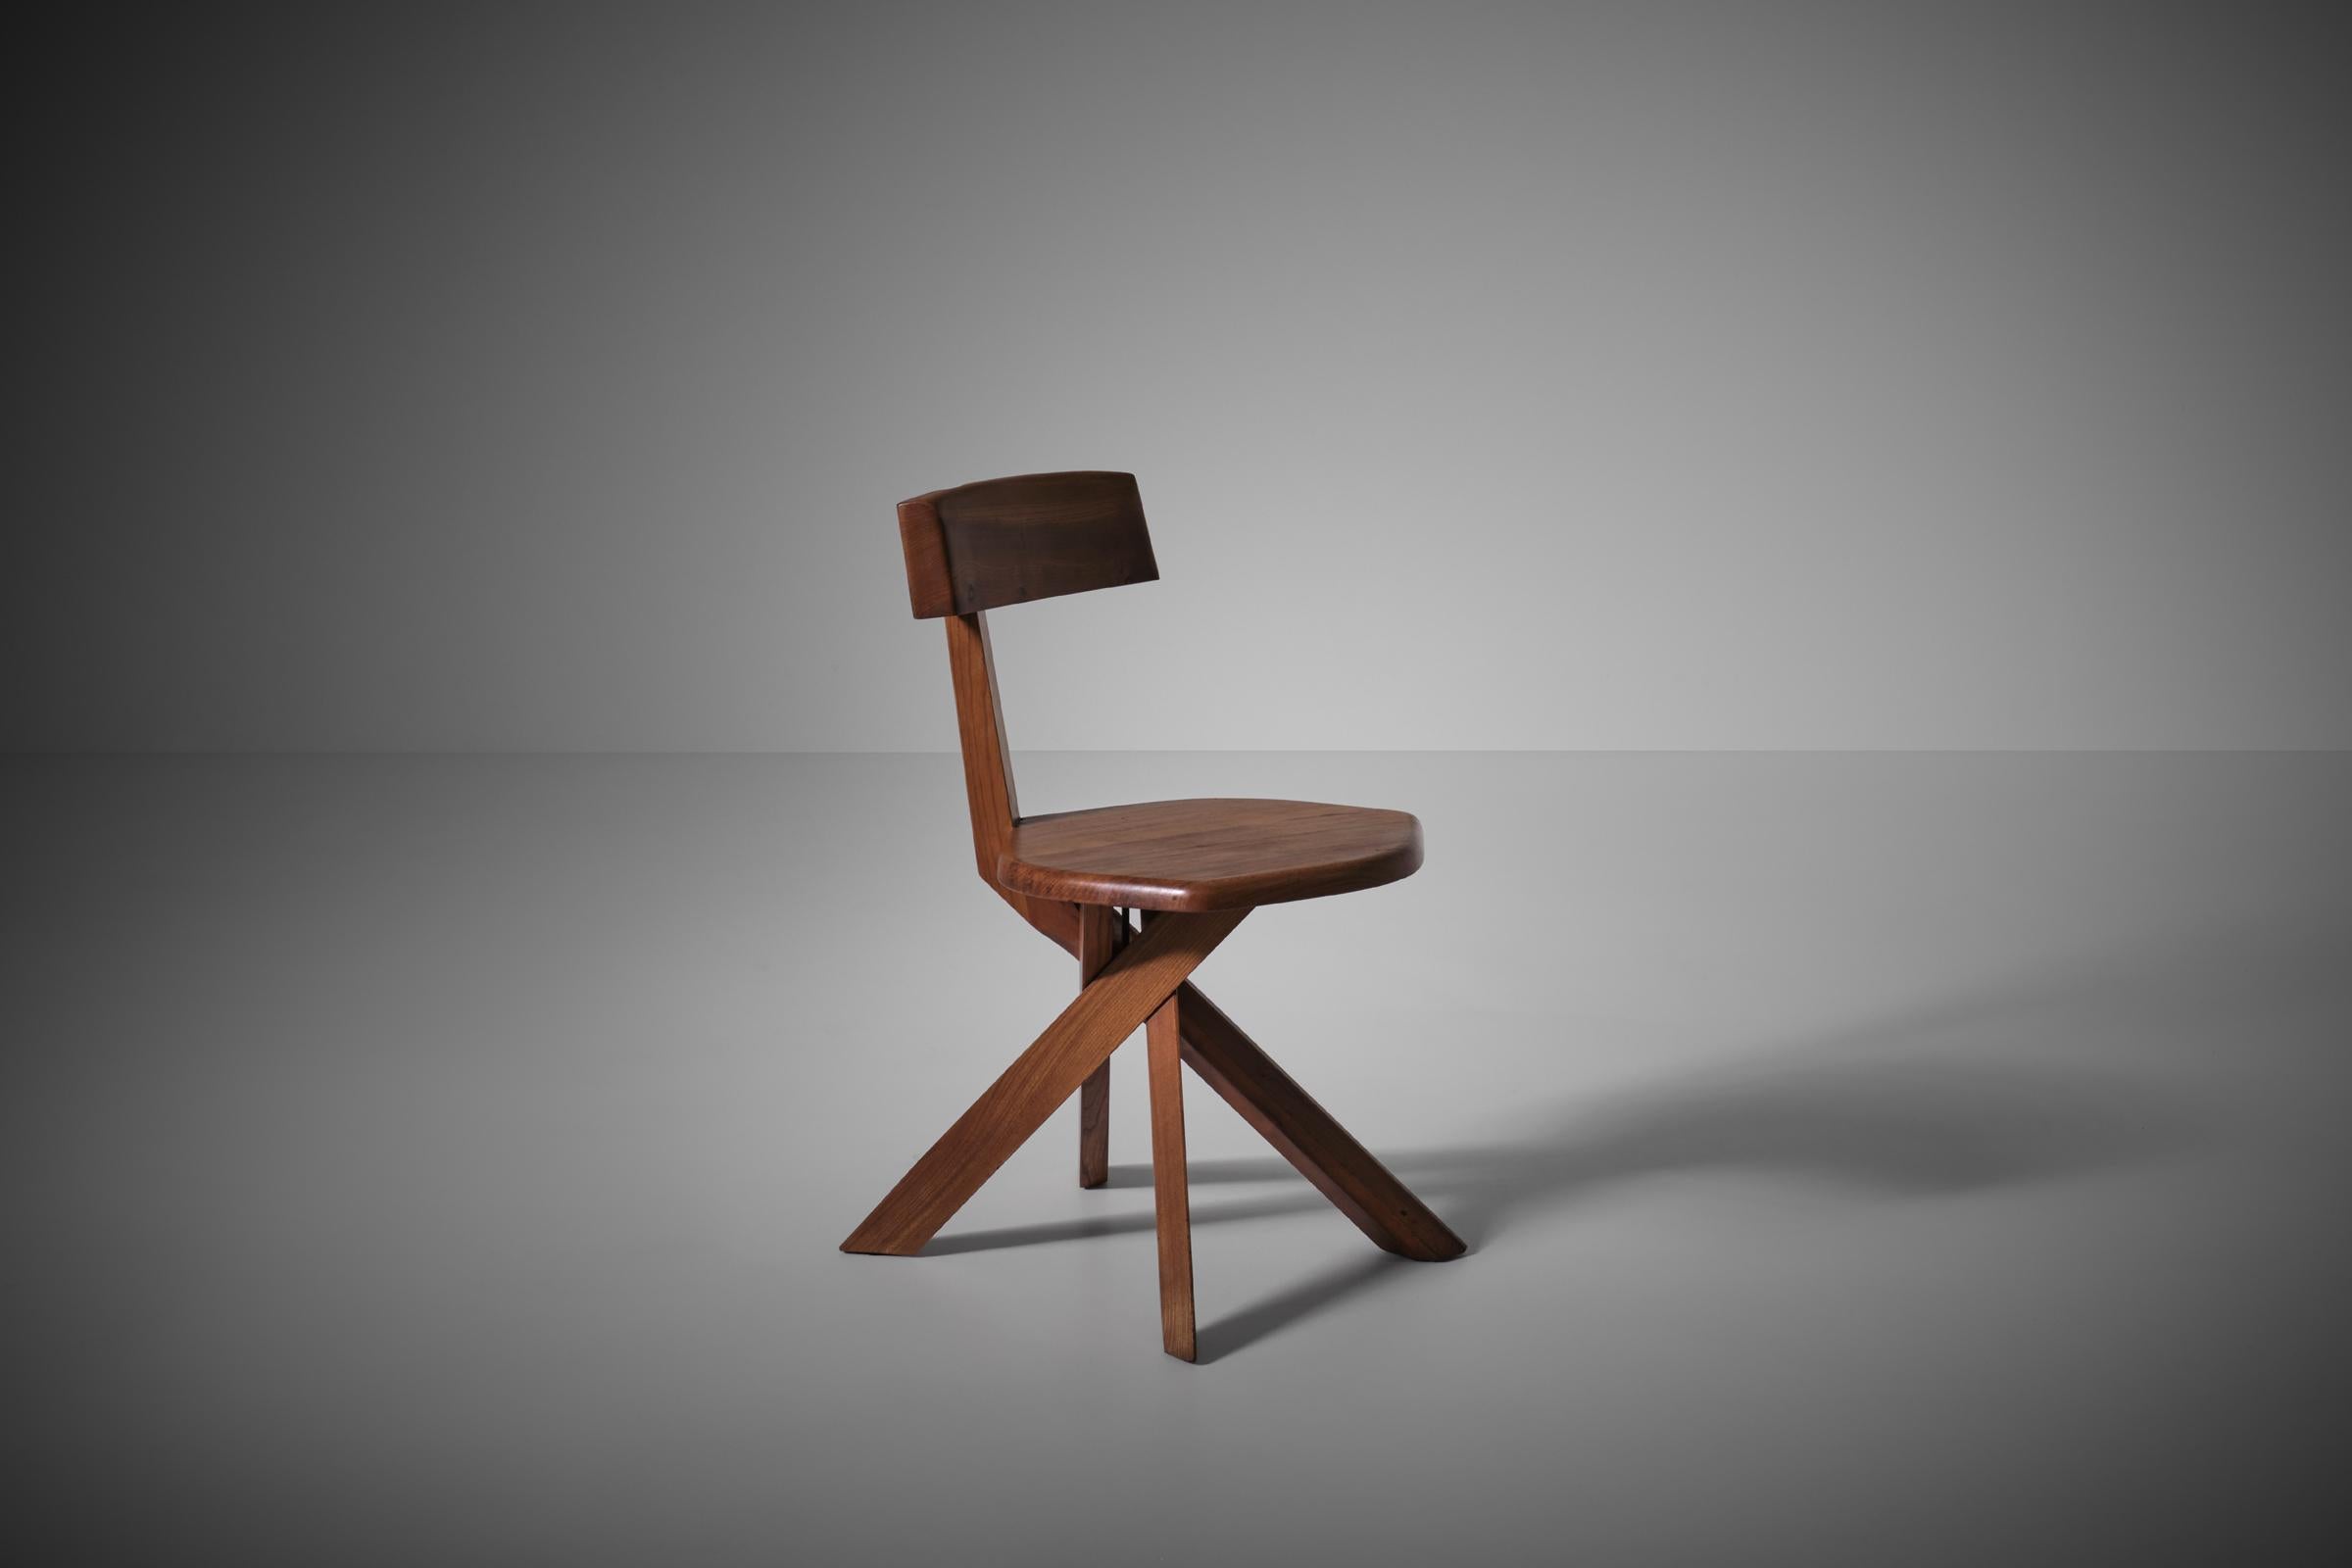 Sculptural chair model ‘S34’ by Pierre Chapo, France 1960s. Remarkable design with the turned asymmetrical base, which is also used for table series - one of the best pieces by Chapo. The chair is made in solid Elm with a beautiful exposed grain and